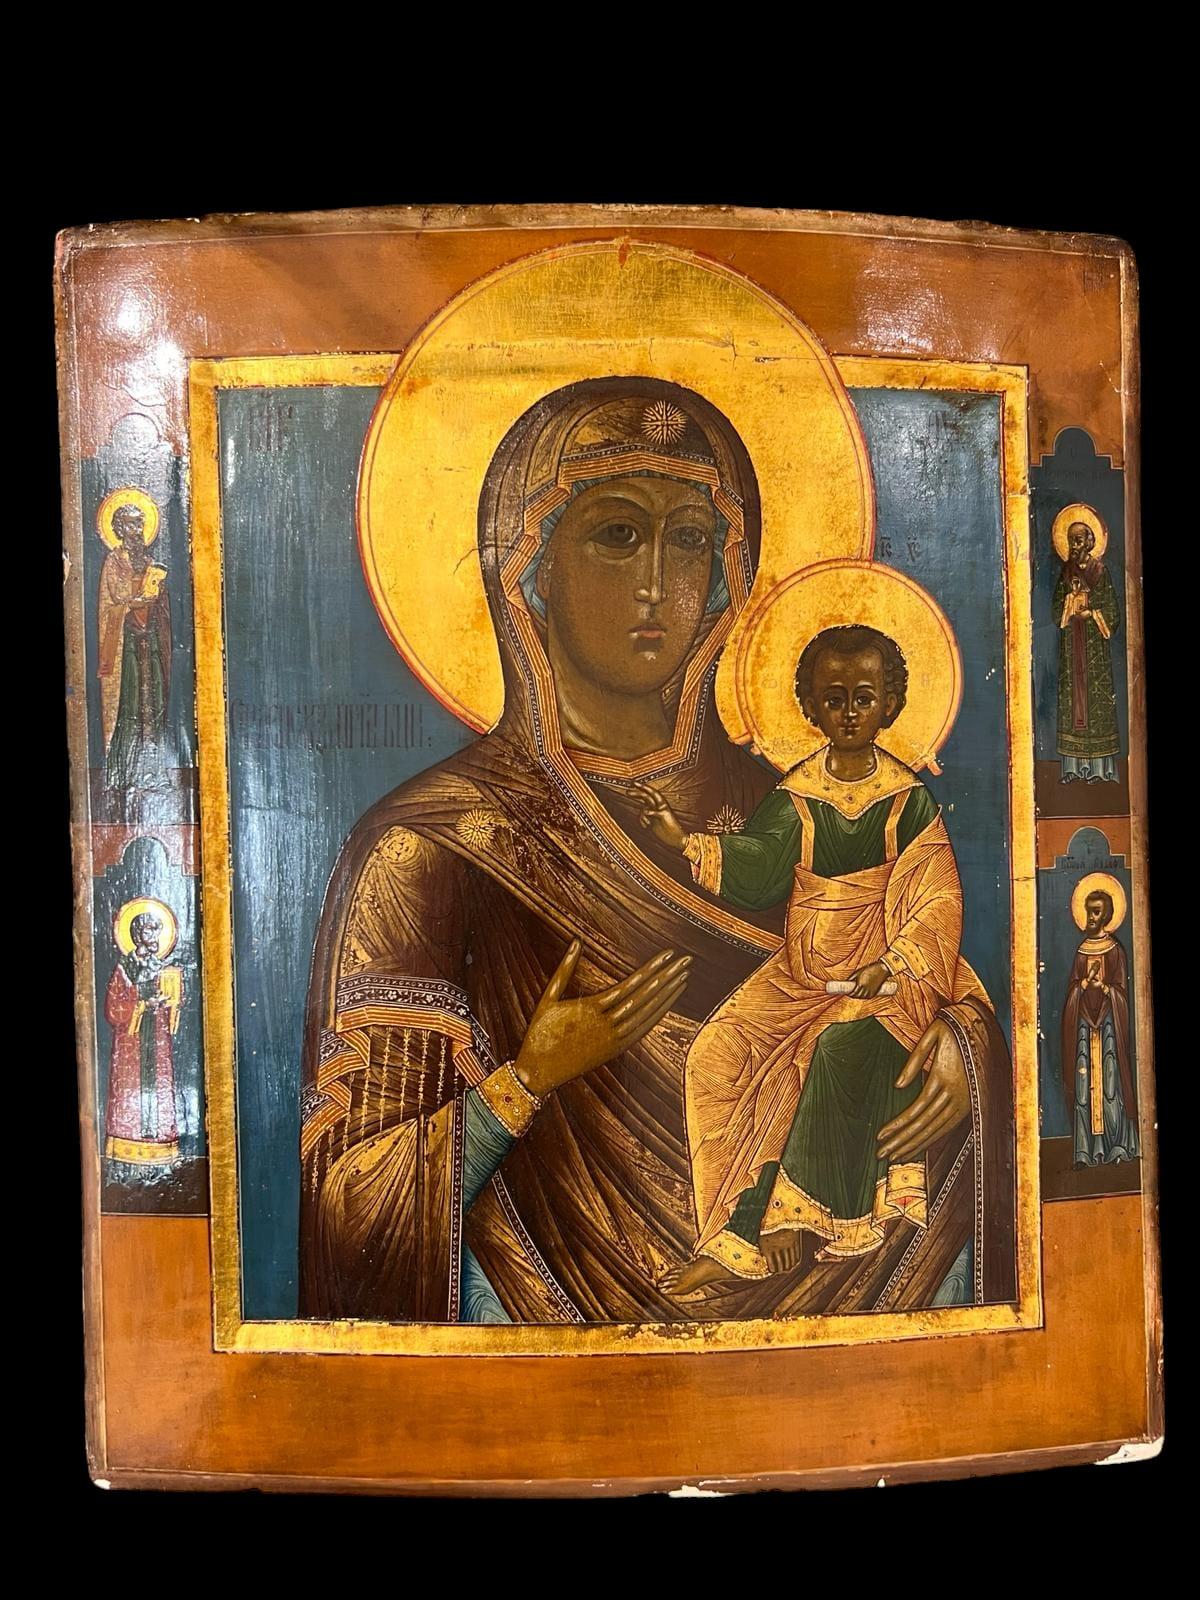 This beautiful orthodox icon from the mid-19th century in Russia depicts the Mother of God Tikhvinskaia. It originates from the town of Kineshma, 335 kilometres northeast of Moscow.

According to legend, an icon of the Virgin Mary and Jesus appeared